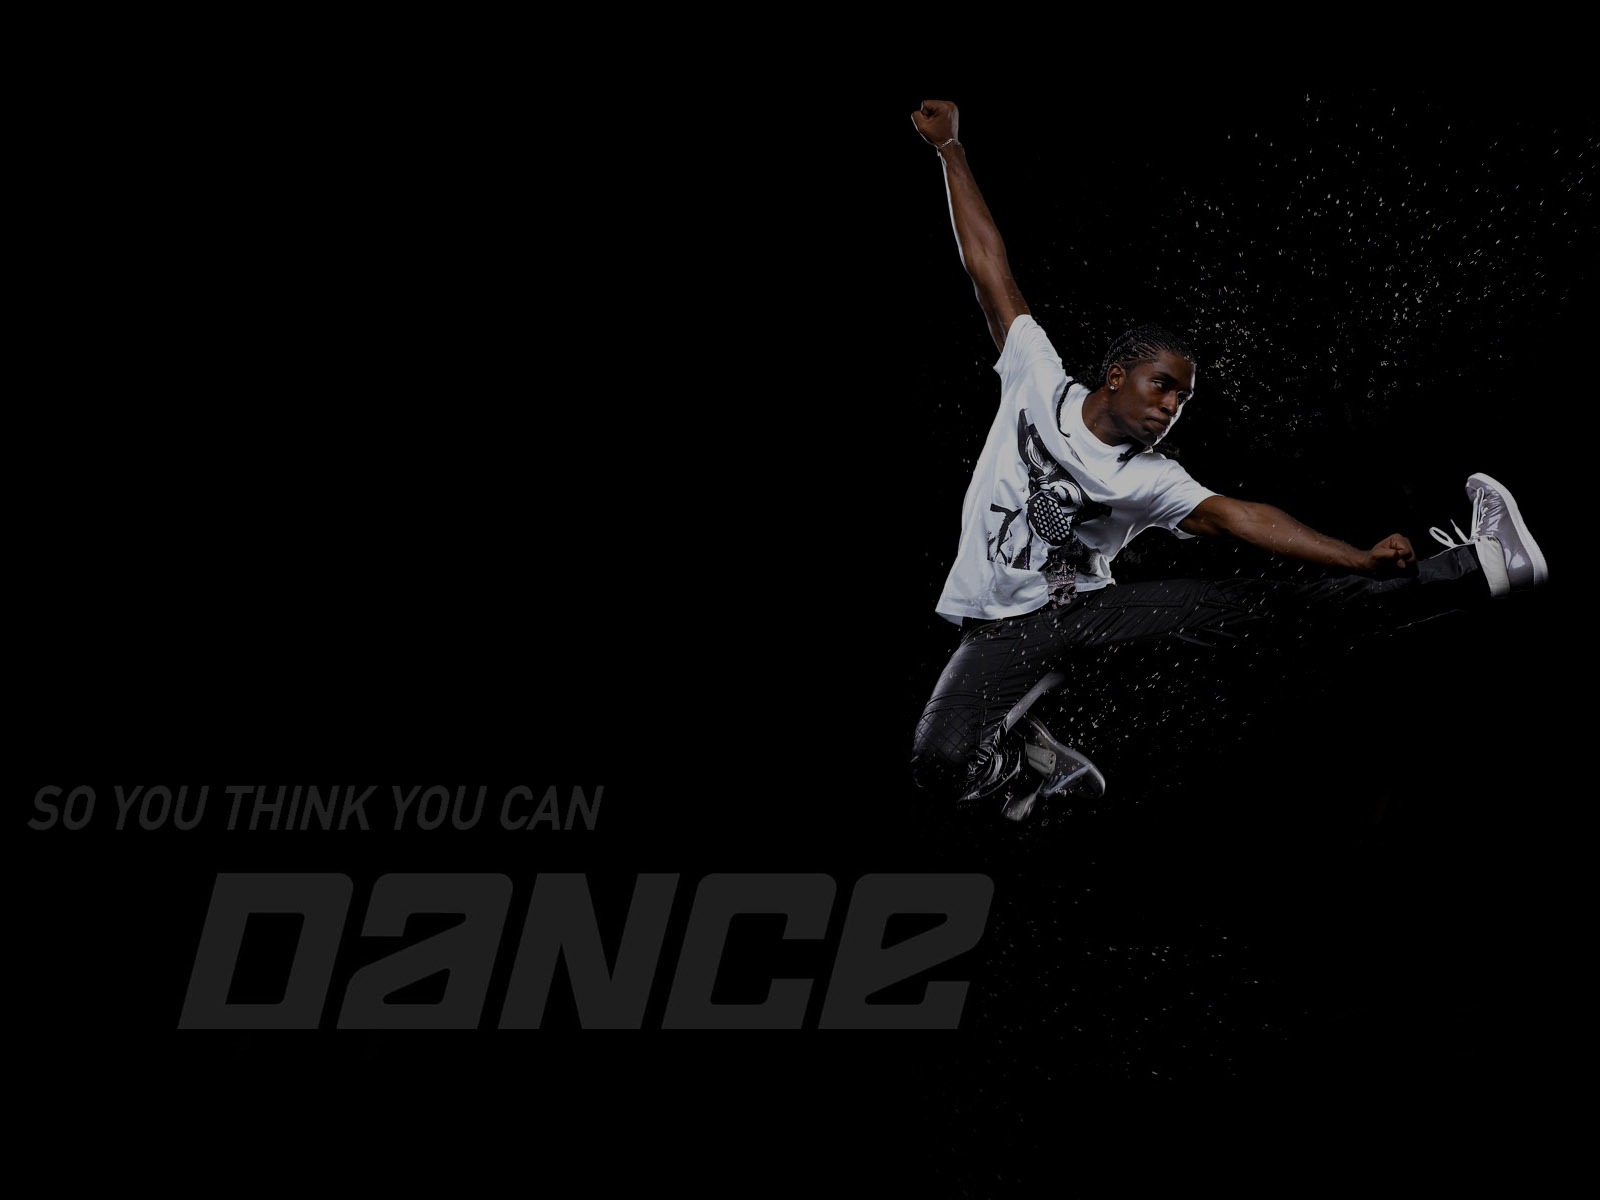 So You Think You Can Dance wallpaper (2) #4 - 1600x1200